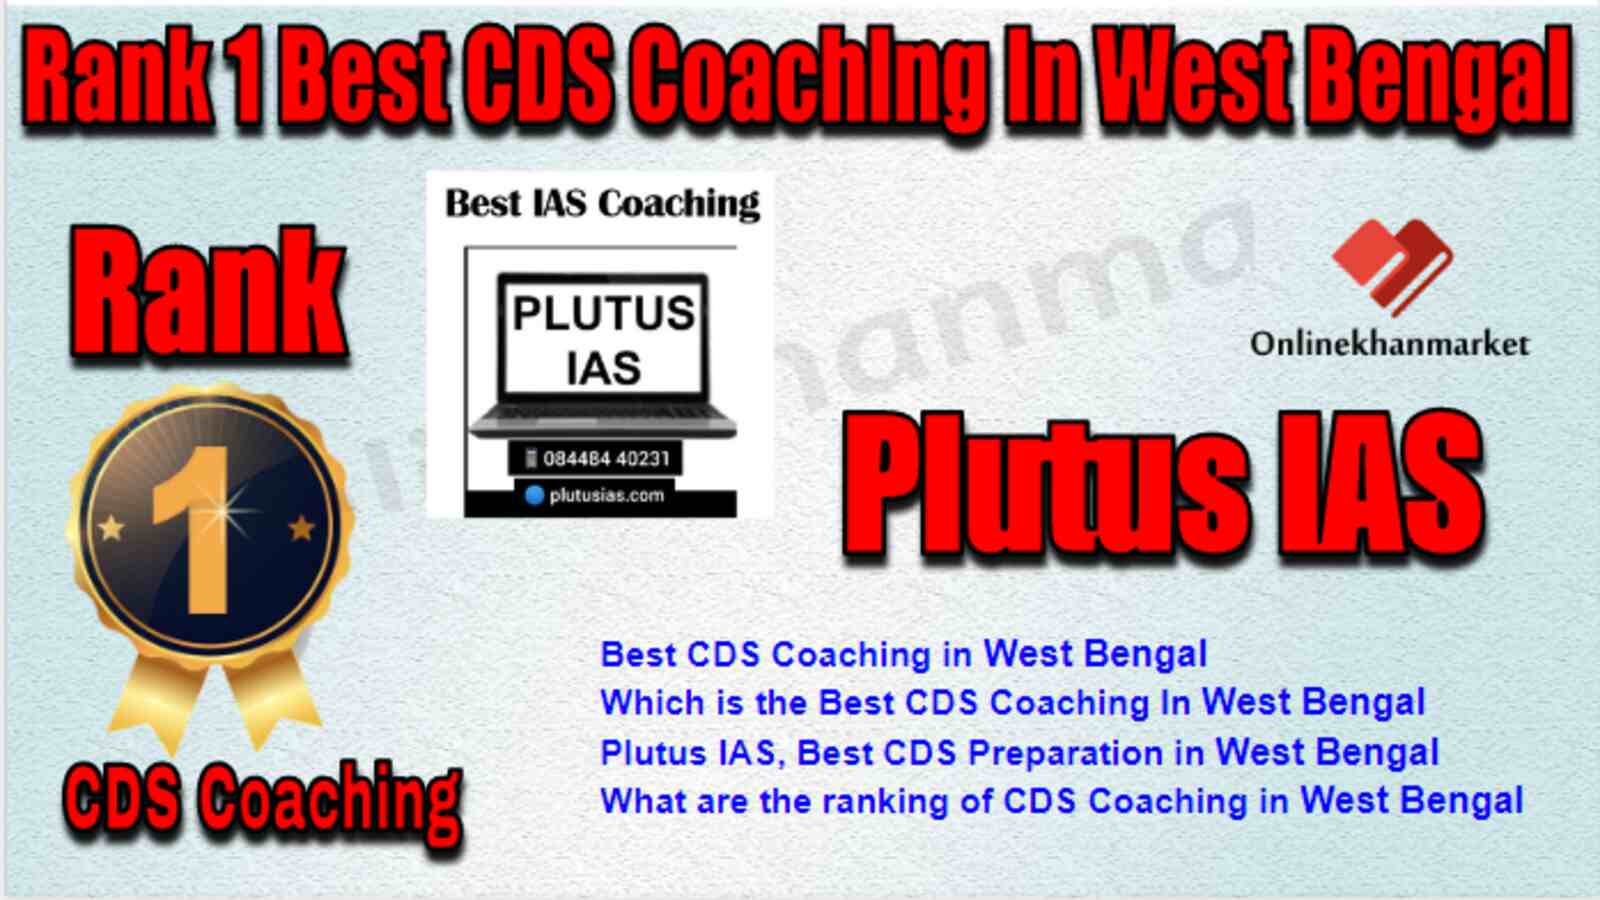 Rank 1 Best CDS Coaching in West Bengal